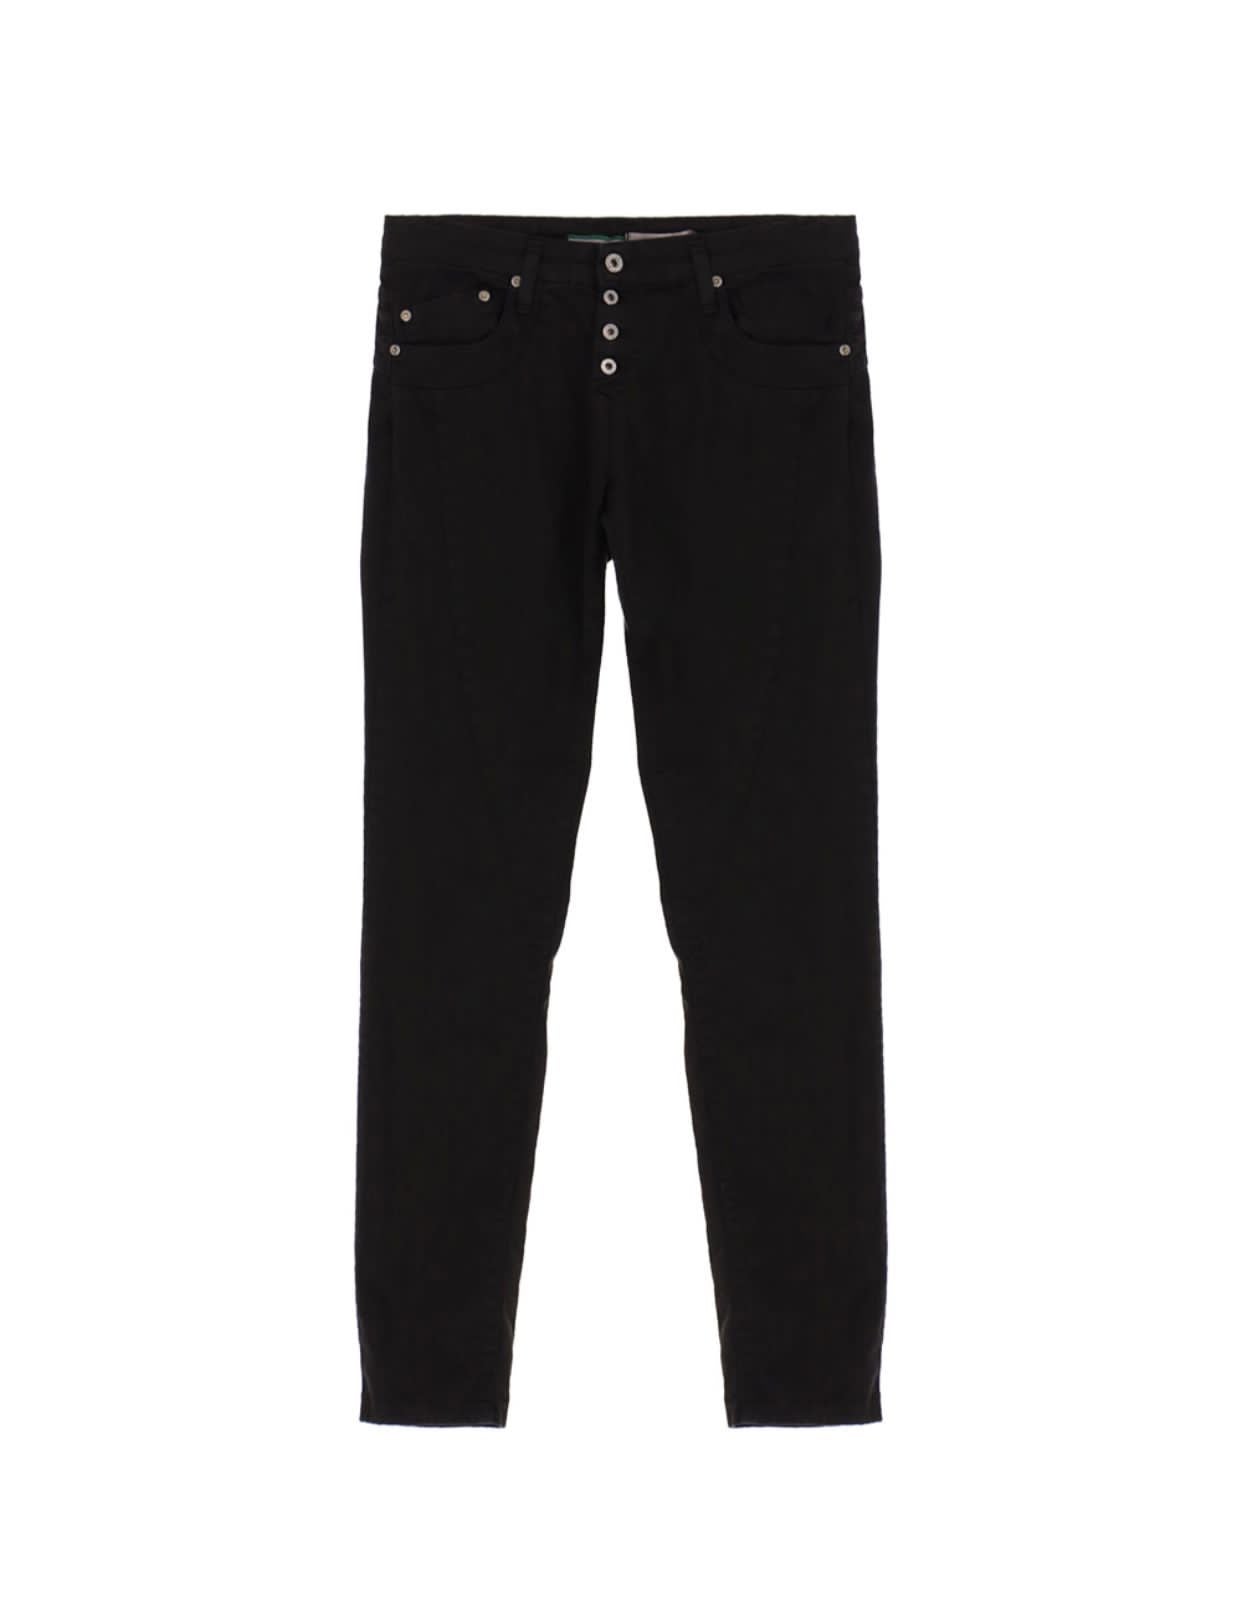 Imperial Italy Imperial Italy Black Stretch Denim Jeans